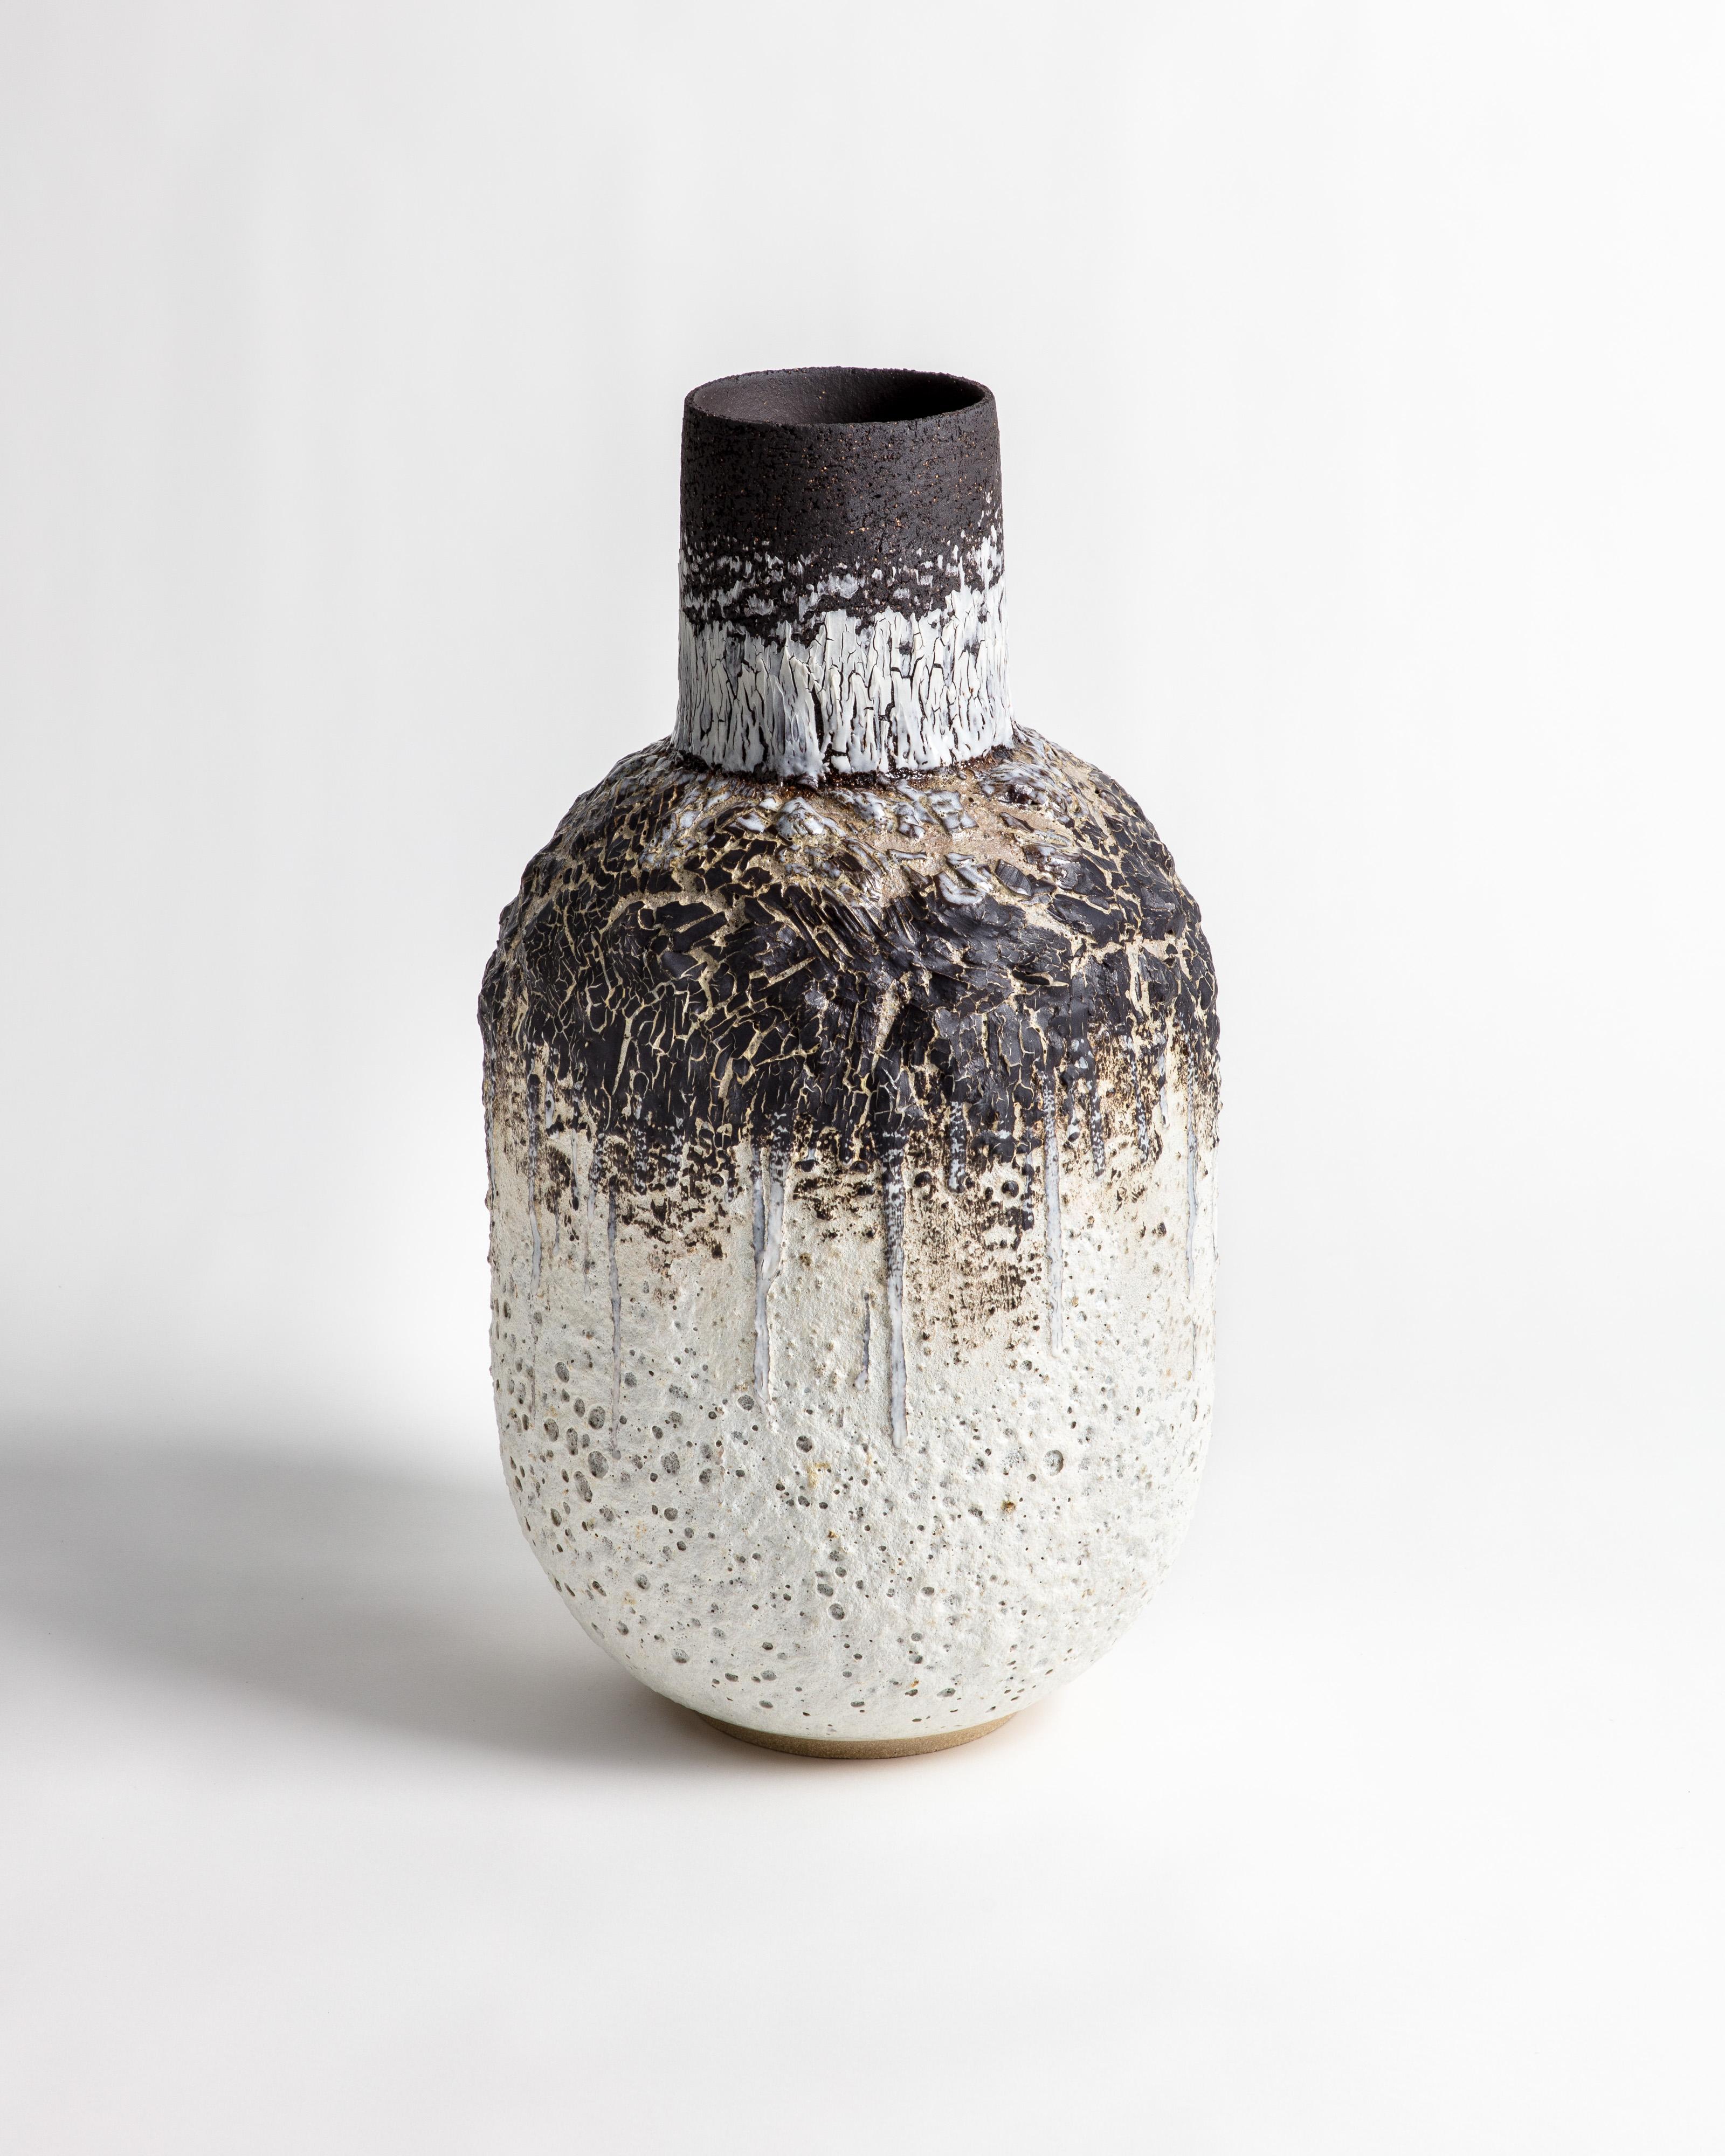 Tall large bottle shaped white and black stoneware clay and porcelain vessel with heavy volcanic textured glaze and black porcelain crackle.

The work is hand built using a combination of stoneware black and buff clays, volcanic slips are added